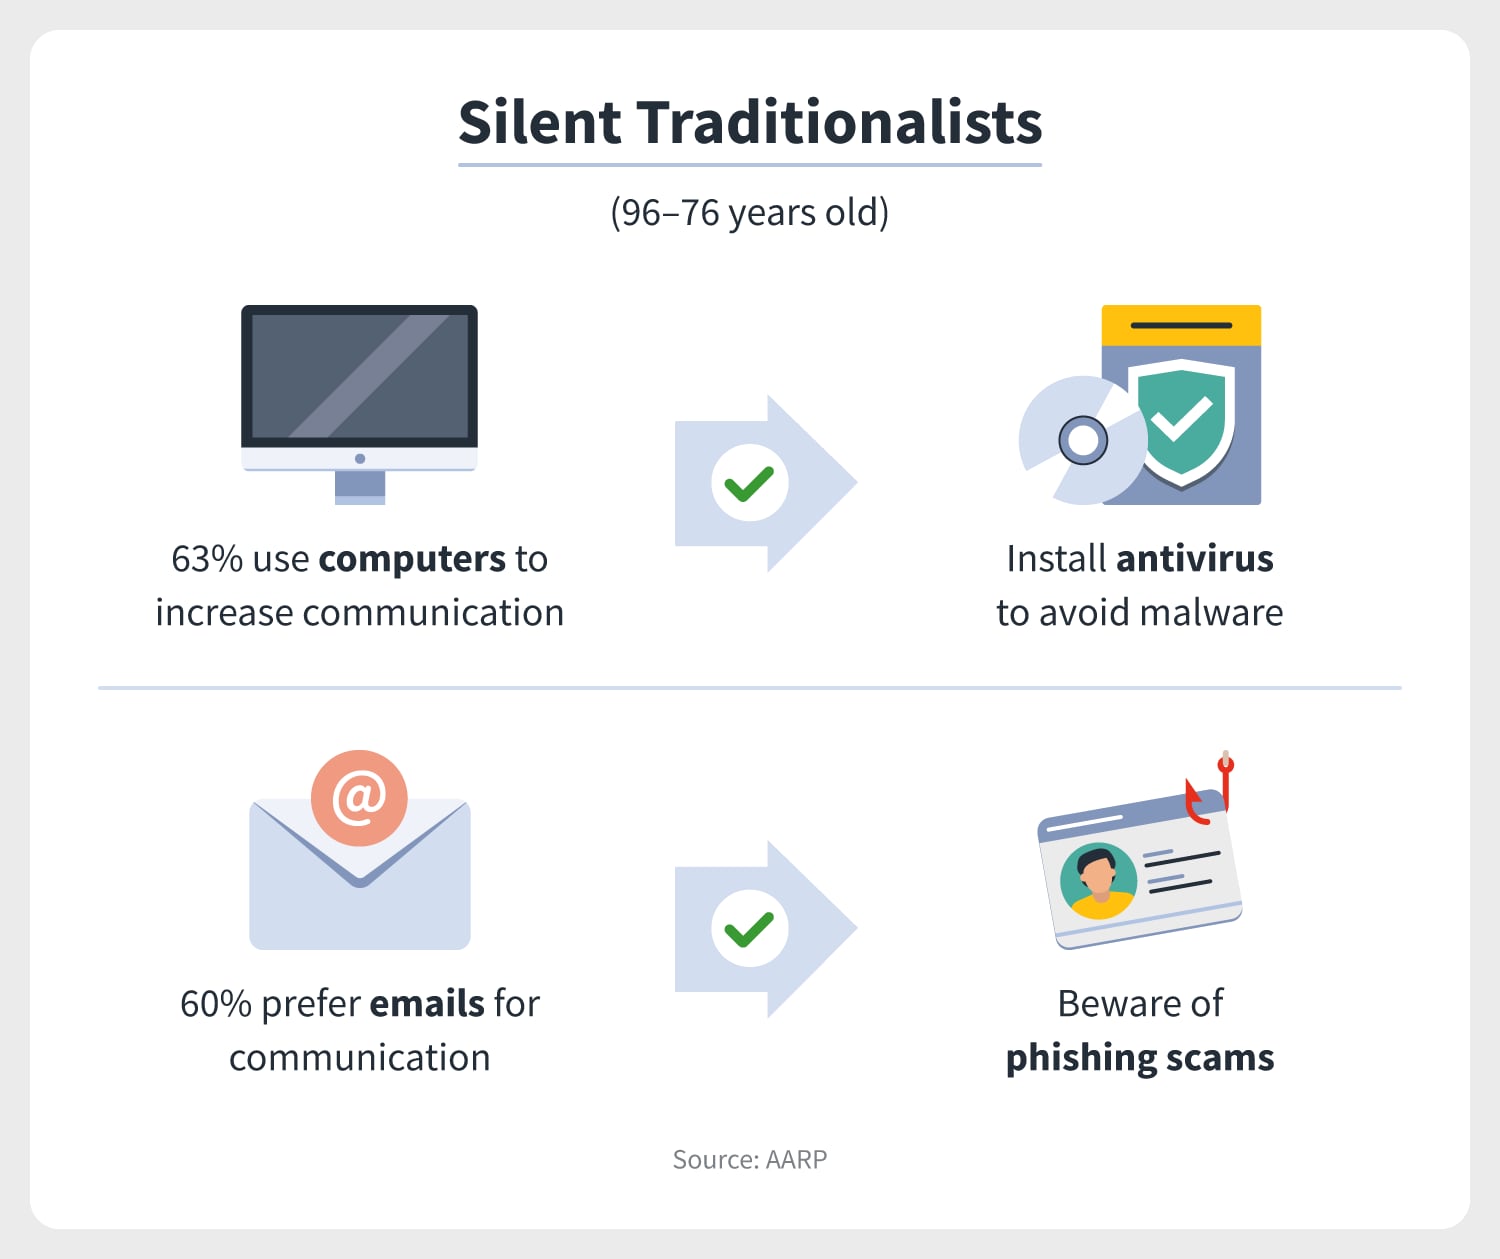 a computer and an email icon indicate that the digital generation Silent Traditionalists prefer these types of technology most and that they should level up their cybersecurity when using them